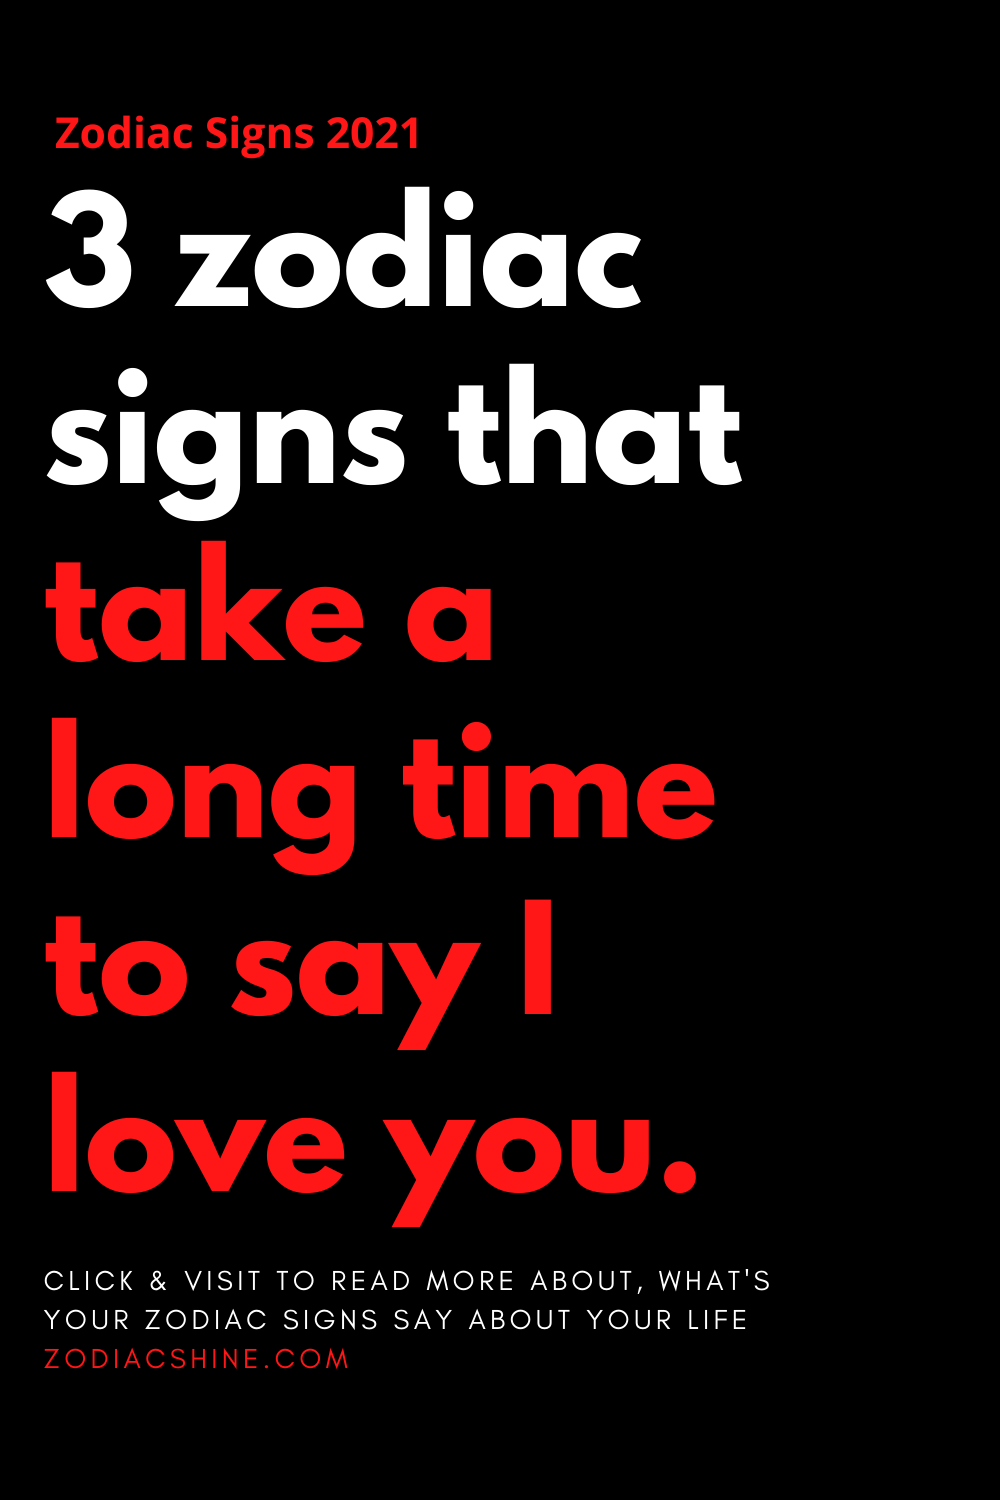 3 zodiac signs that take a long time to say I love you.